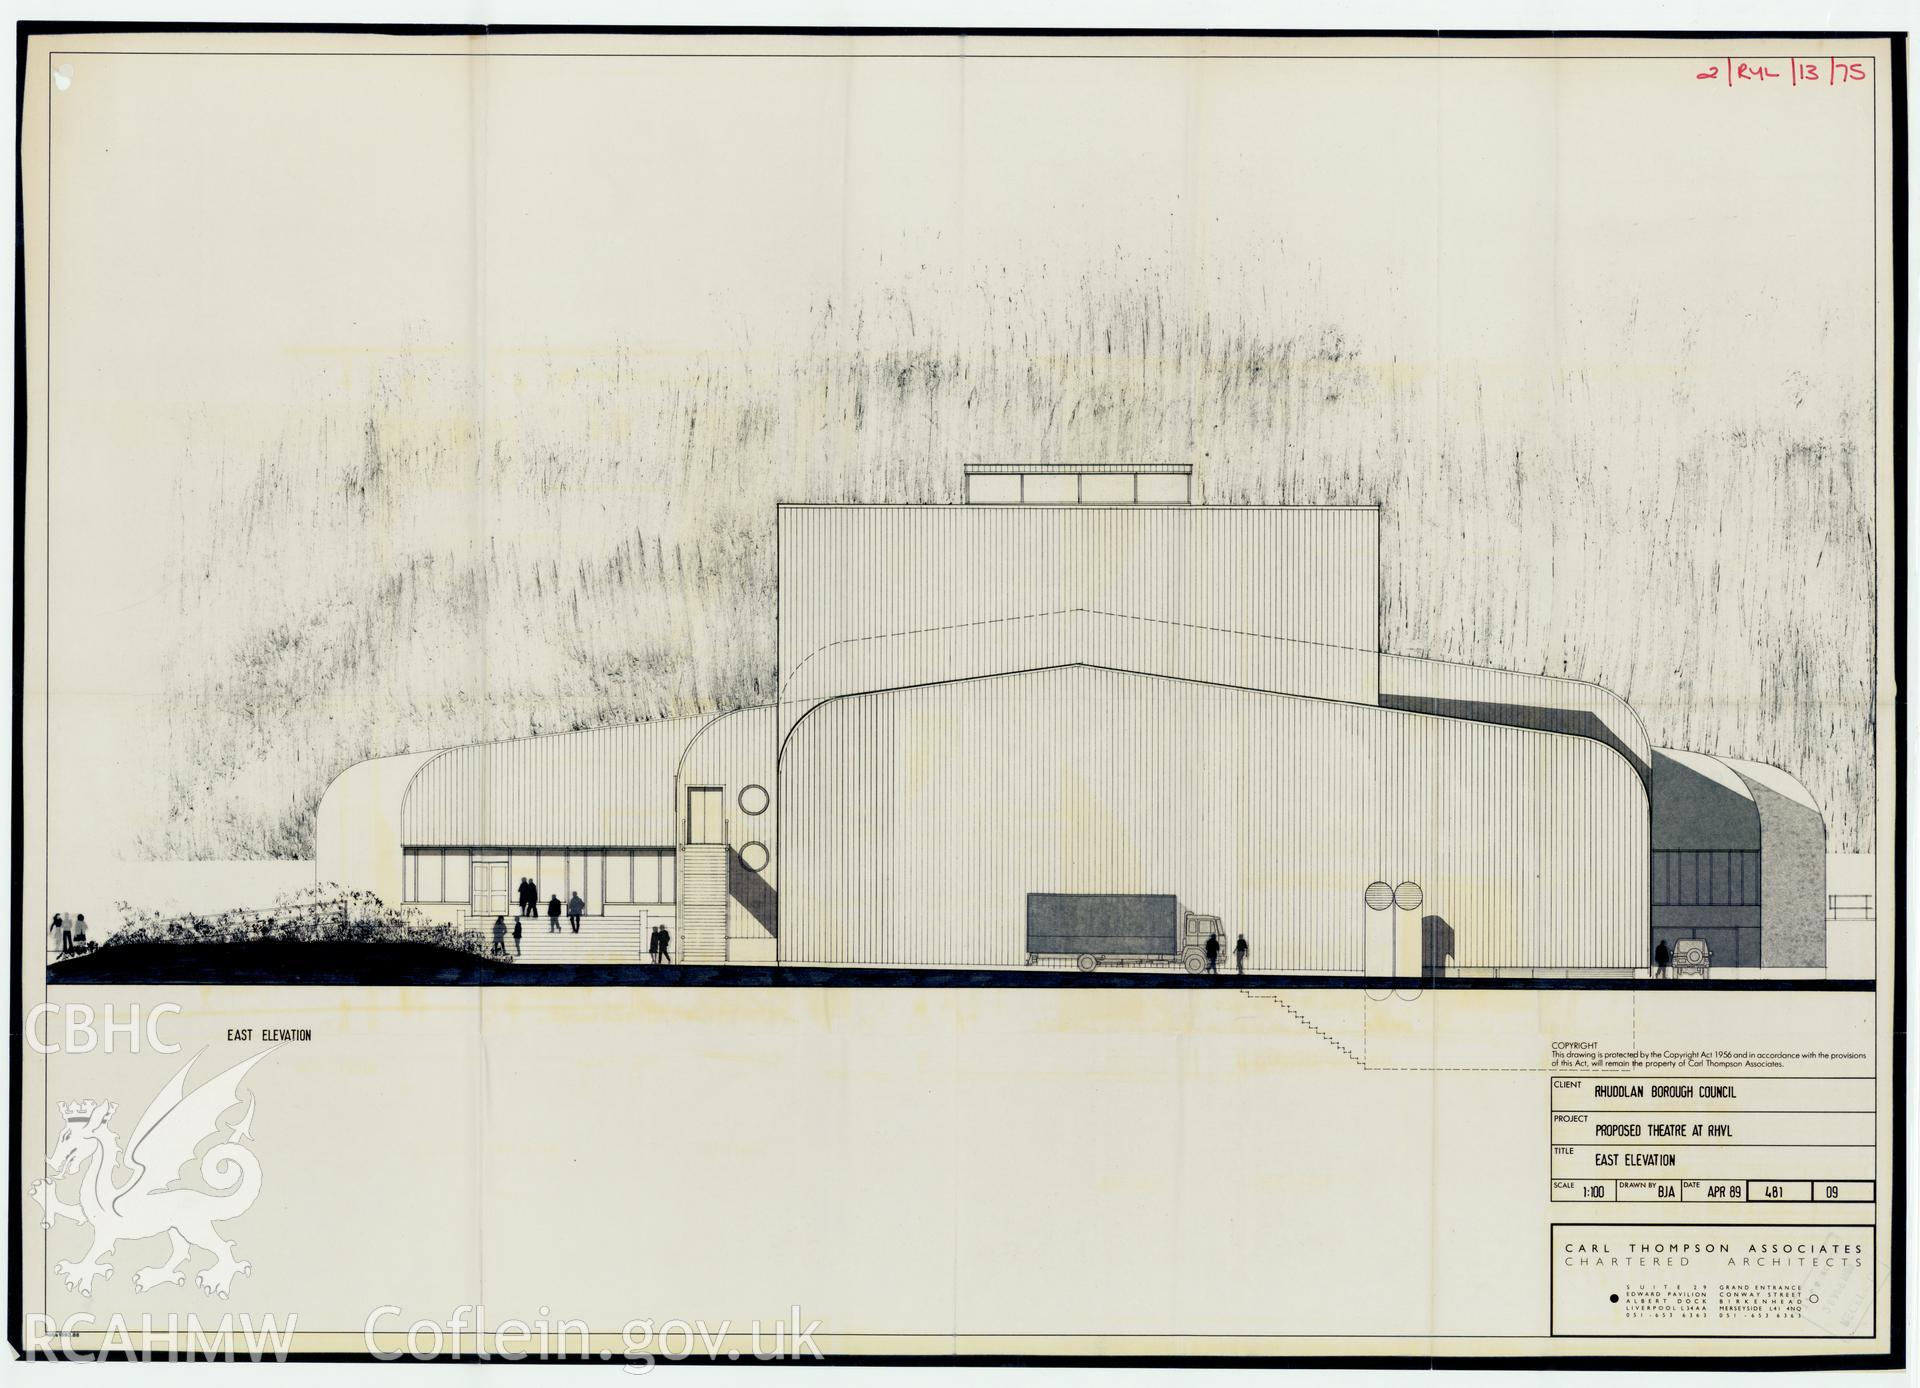 Digital copy of a measured drawing showing the east elevation of the 1989 proposed Theatre, Rhuddlan, produced by Carl Thompson Associates. Loaned for copying by Denbighshire County Council.